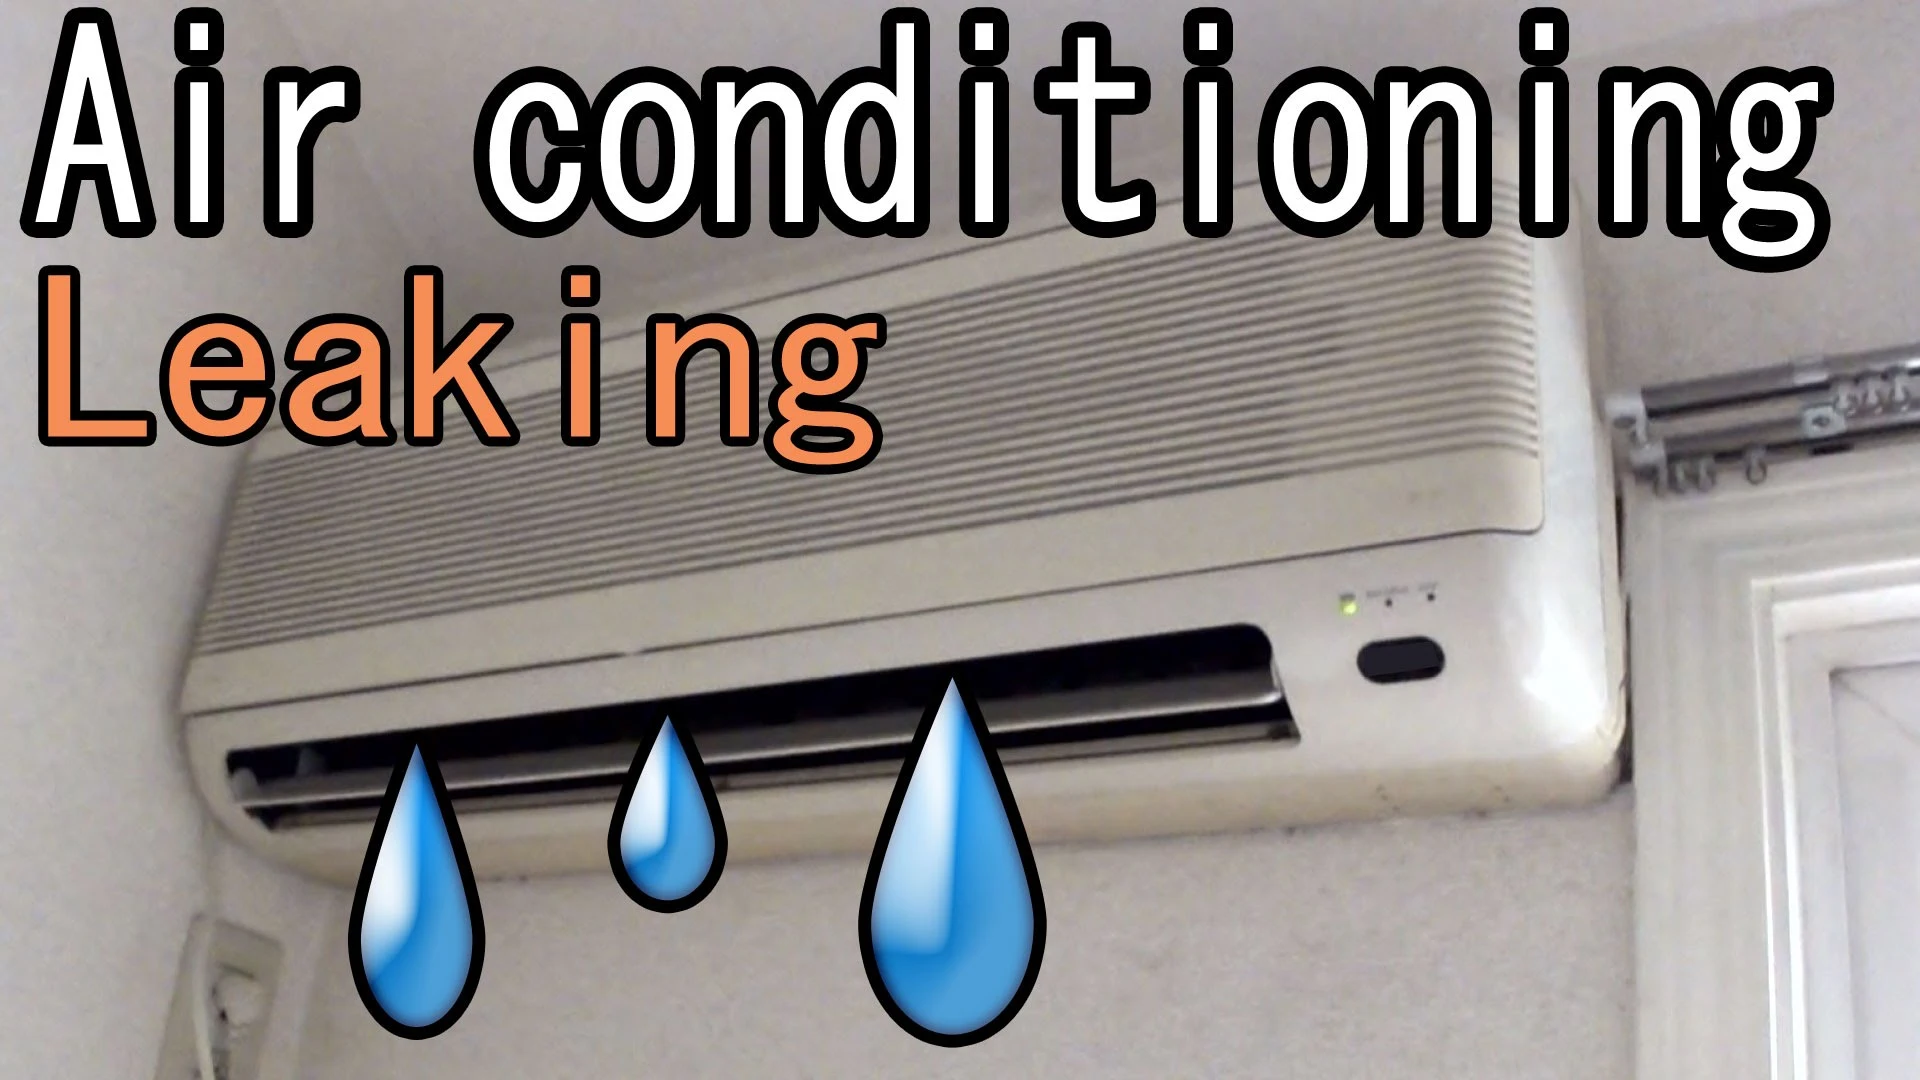 Why is there water coming from my Air Conditioner?